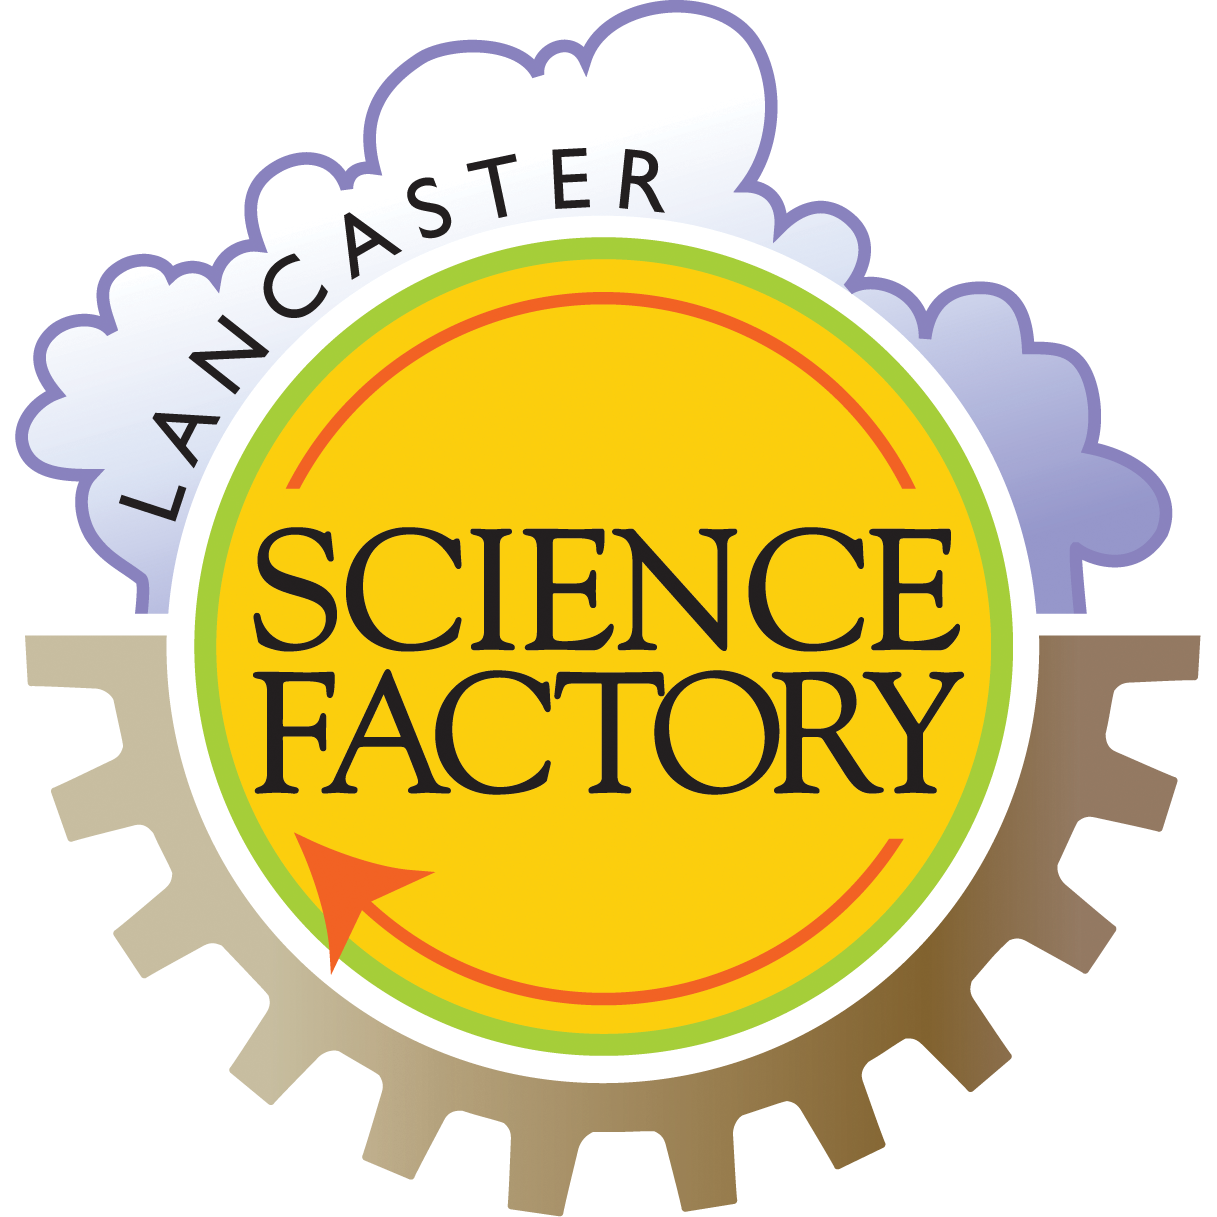 Lancaster science Factory image is a yellow circle with gears at the bottom.